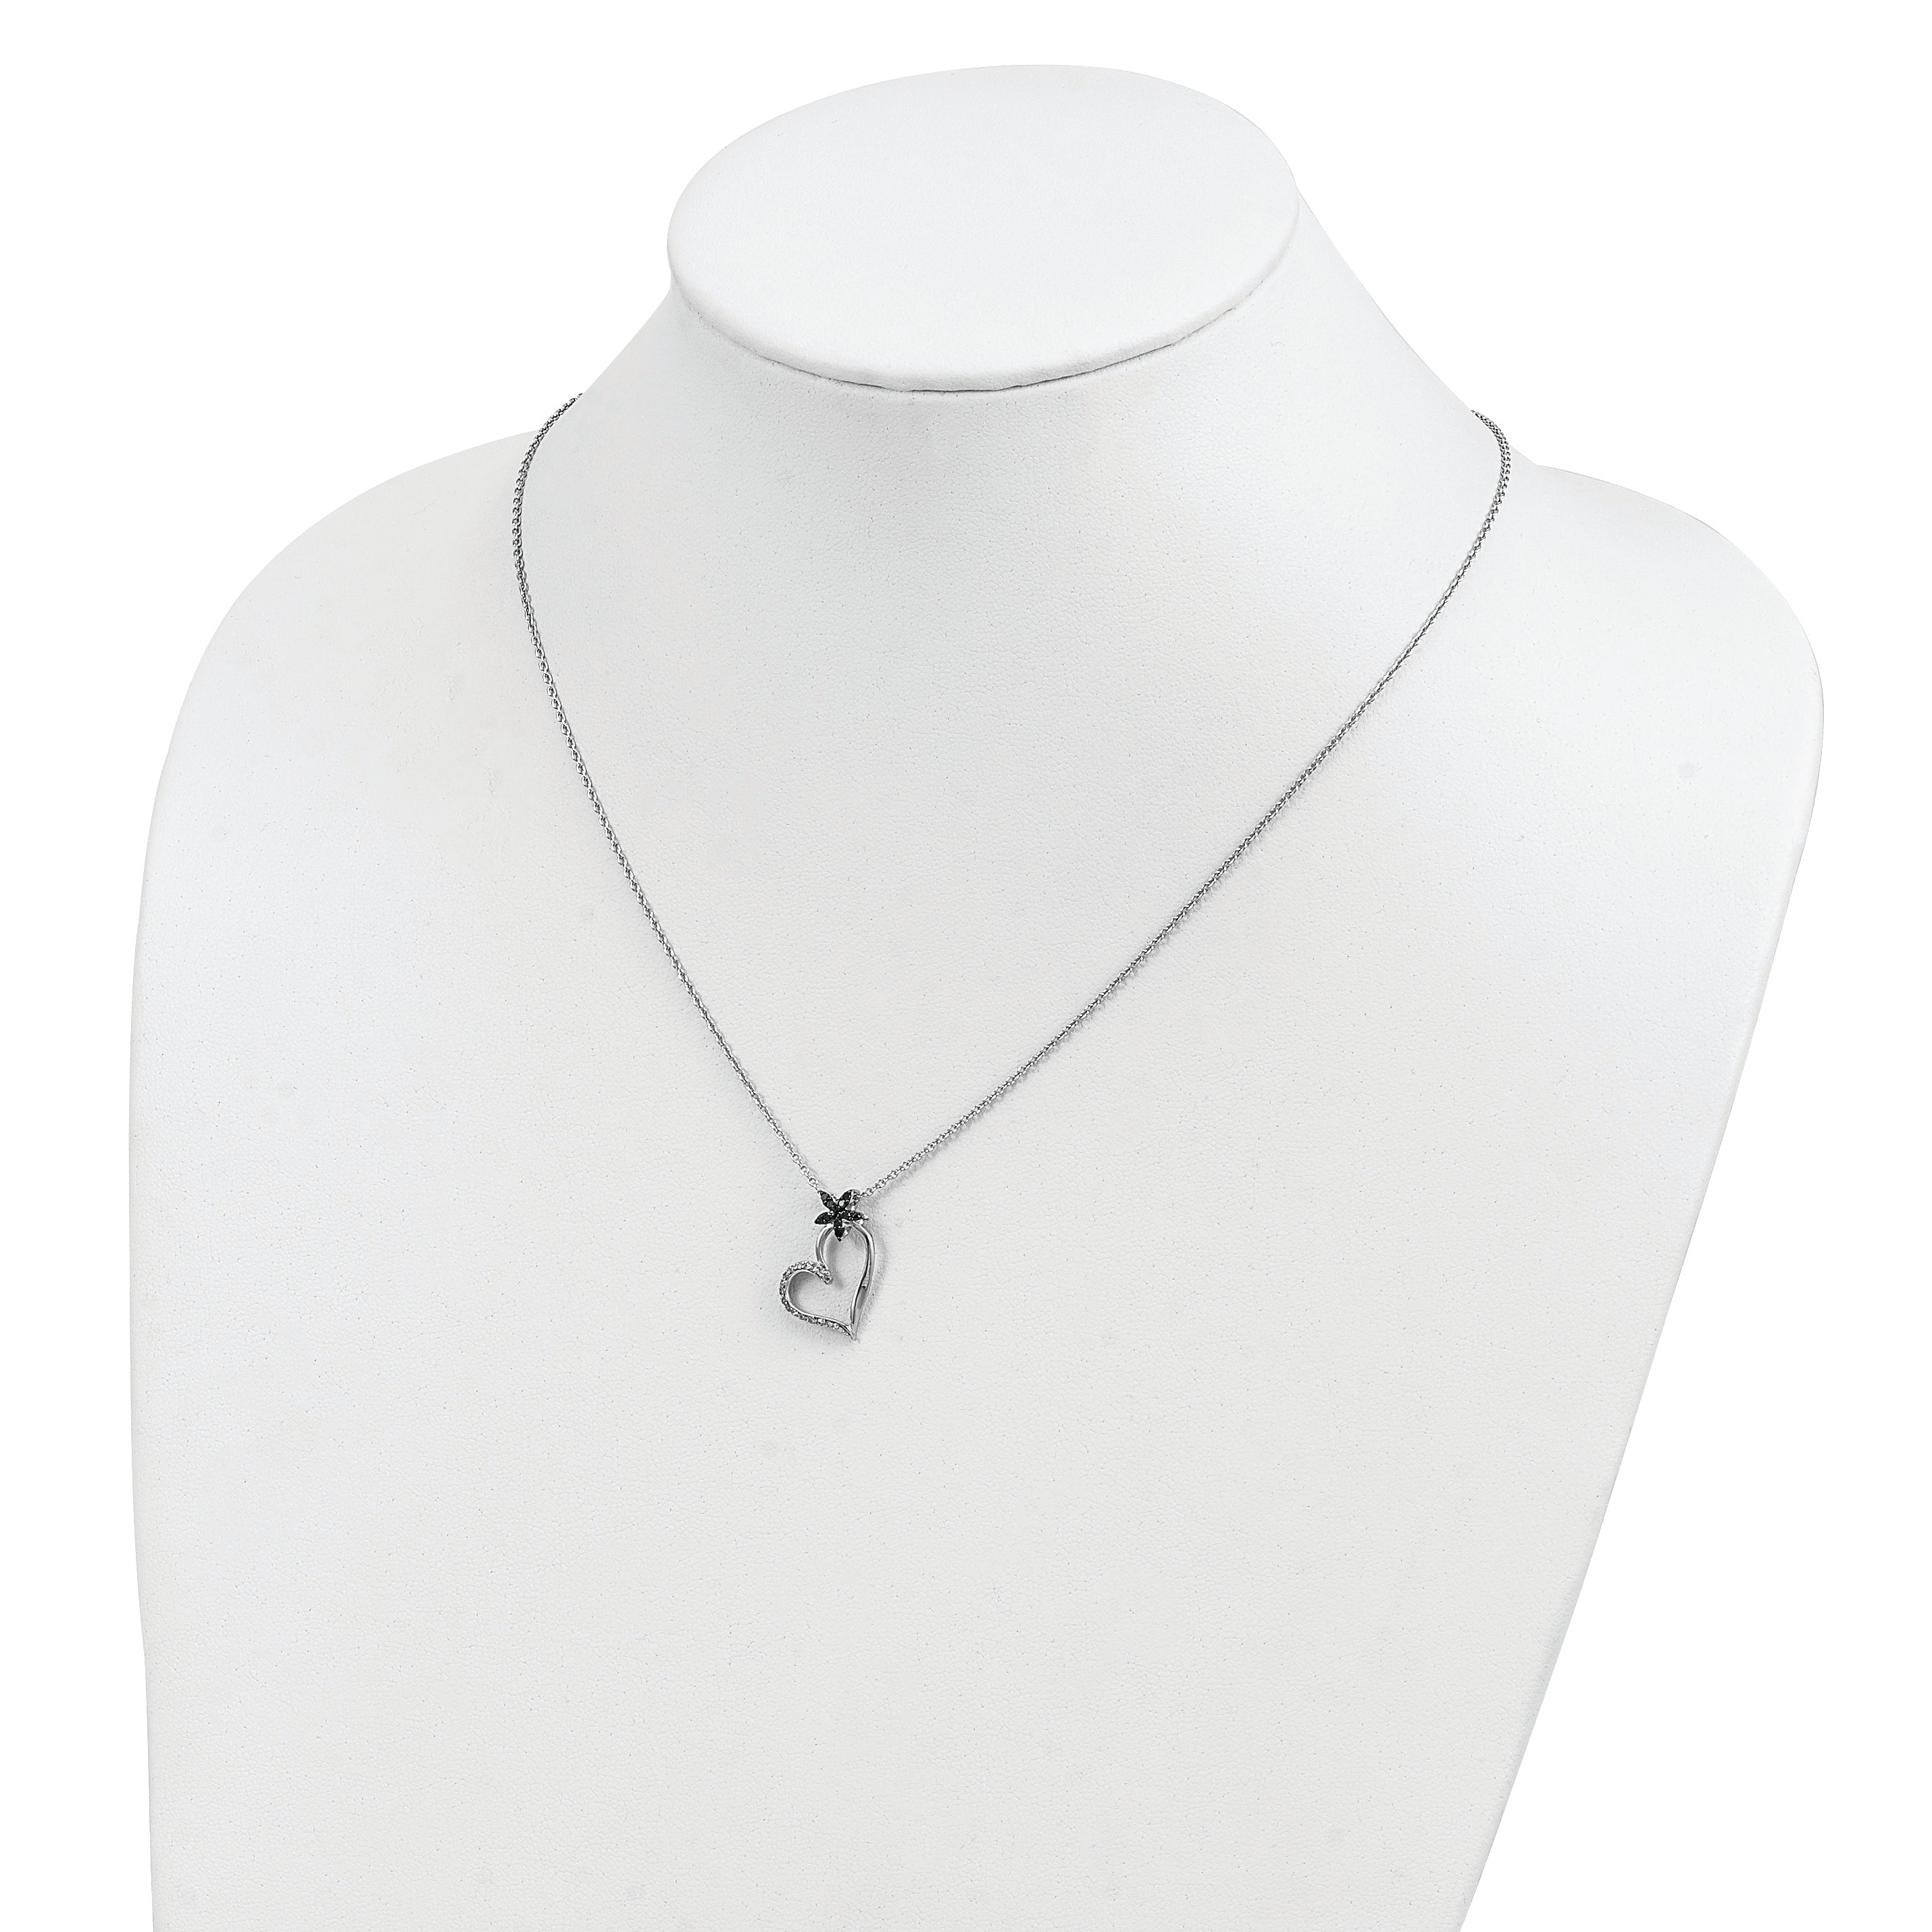 White Night Sterling Silver Rhodium-plated Black and White Diamond Heart with Flower 18 Inch Necklace with 2 Inch Extender